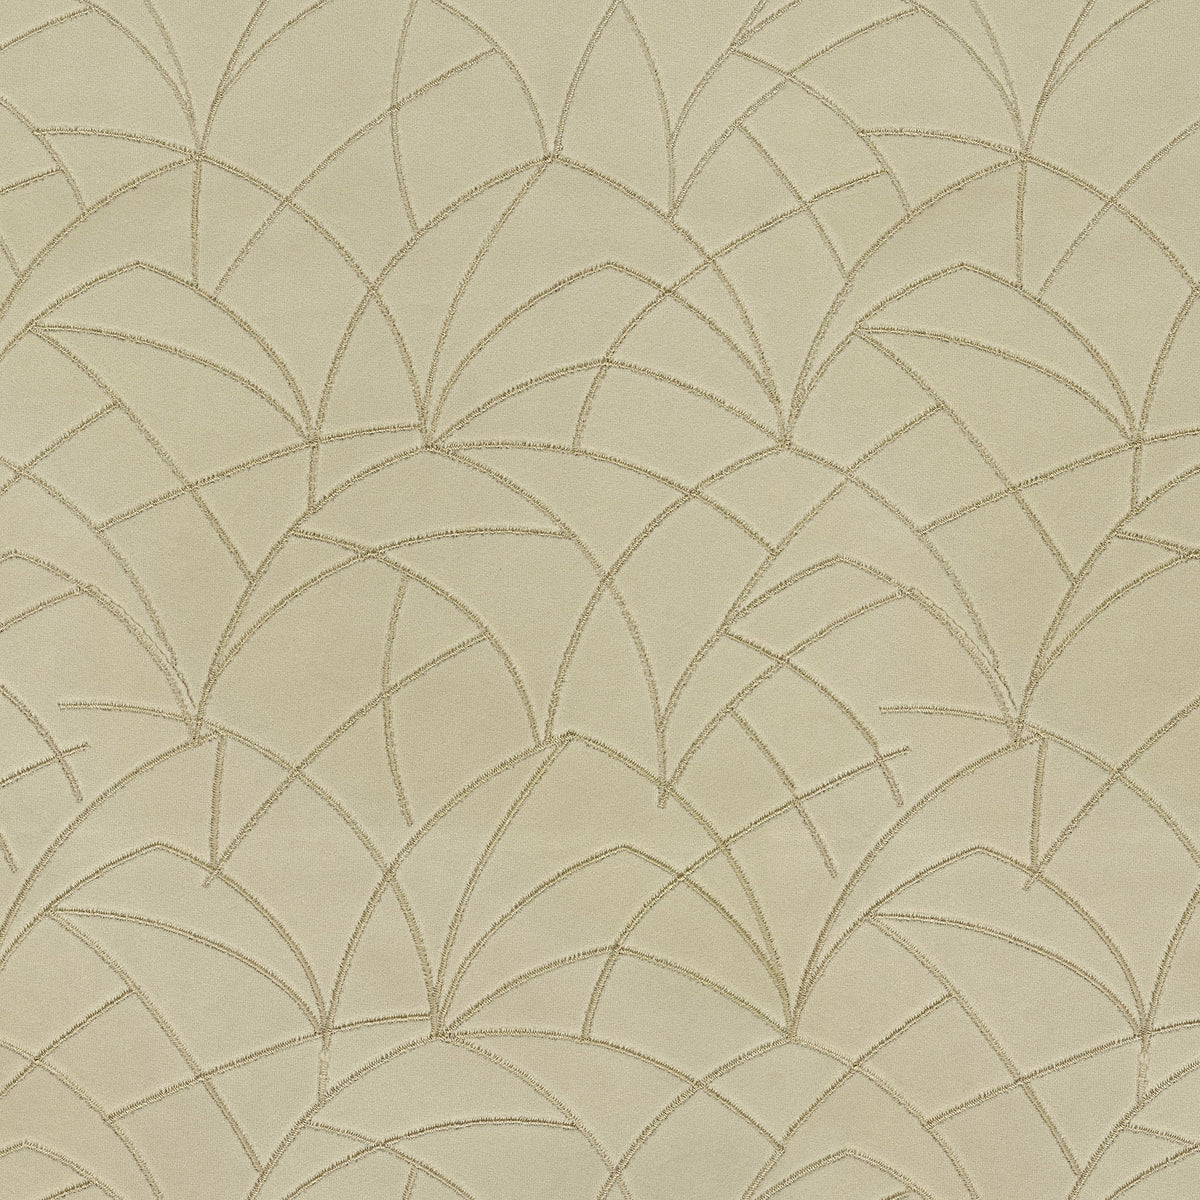 P/K Lifestyles Curvature Embroidery - Flax 411278 Upholstery Fabric